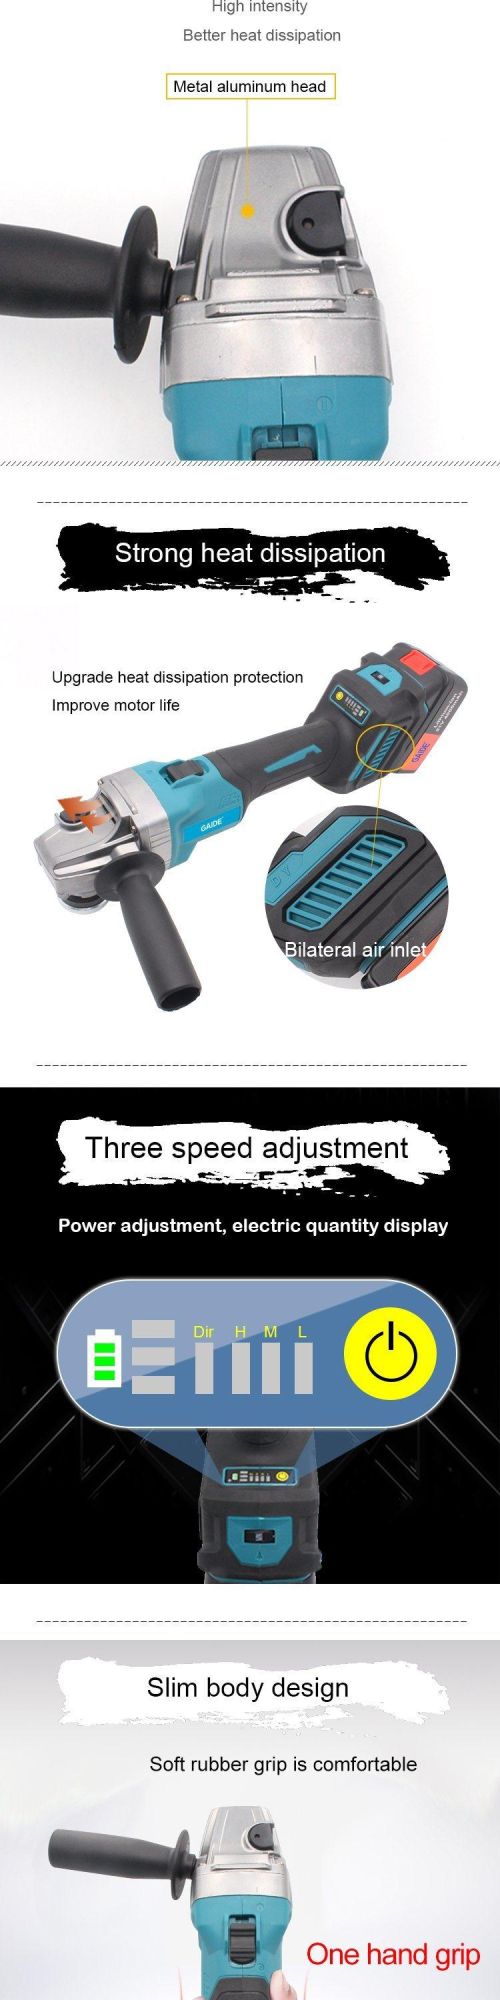 Cordless Angle Grinder Spindle Thread M10